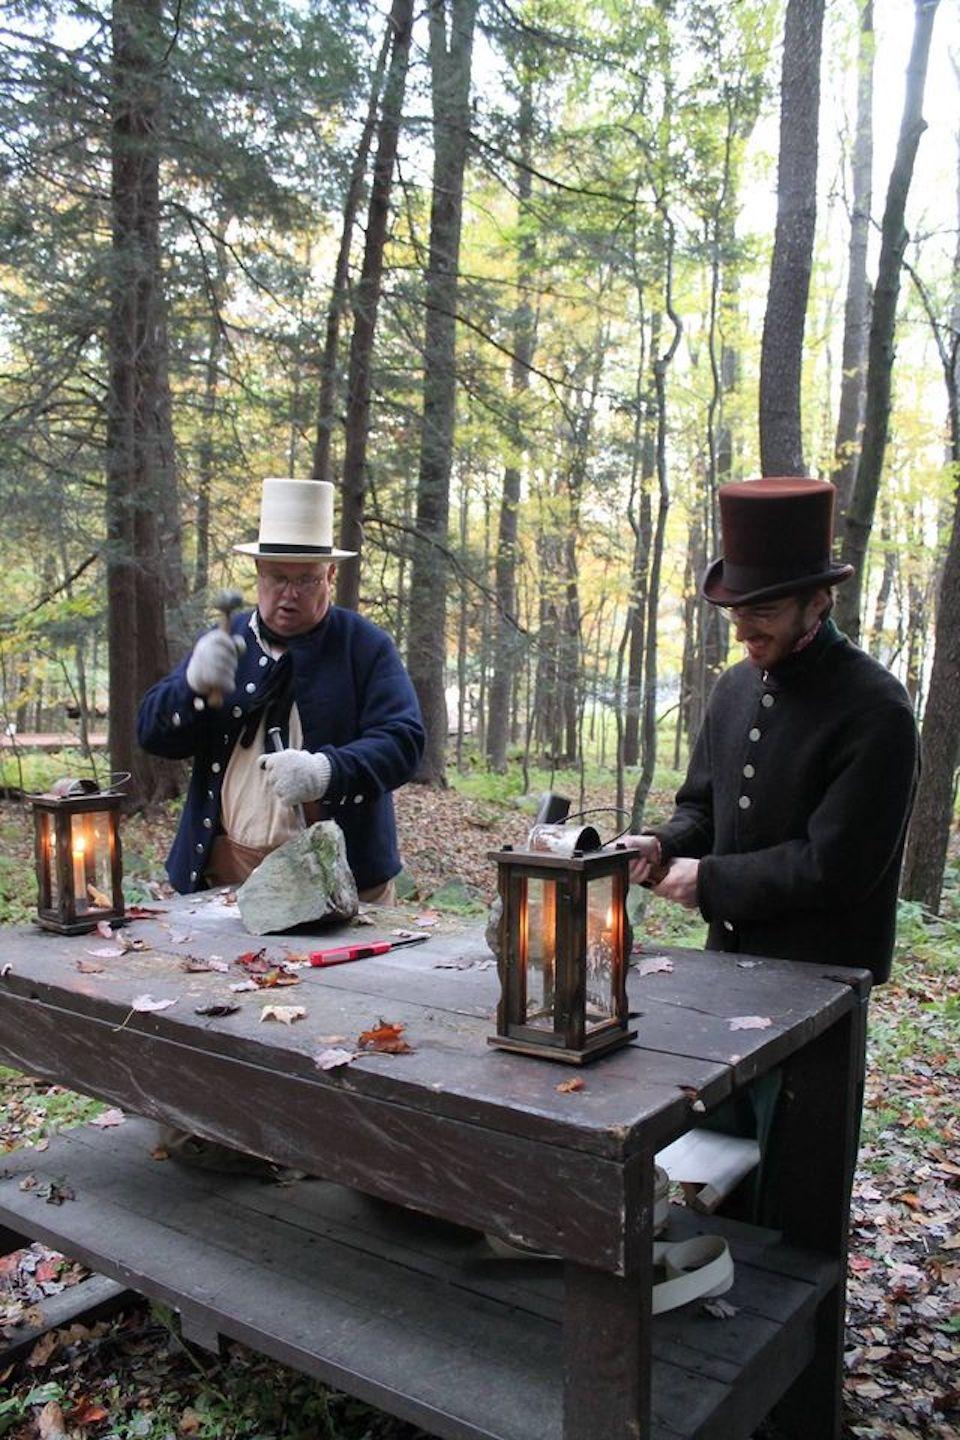 A special Halloween walking tour is planning at Allegheny Railroad Portage National Historic Site/NPS